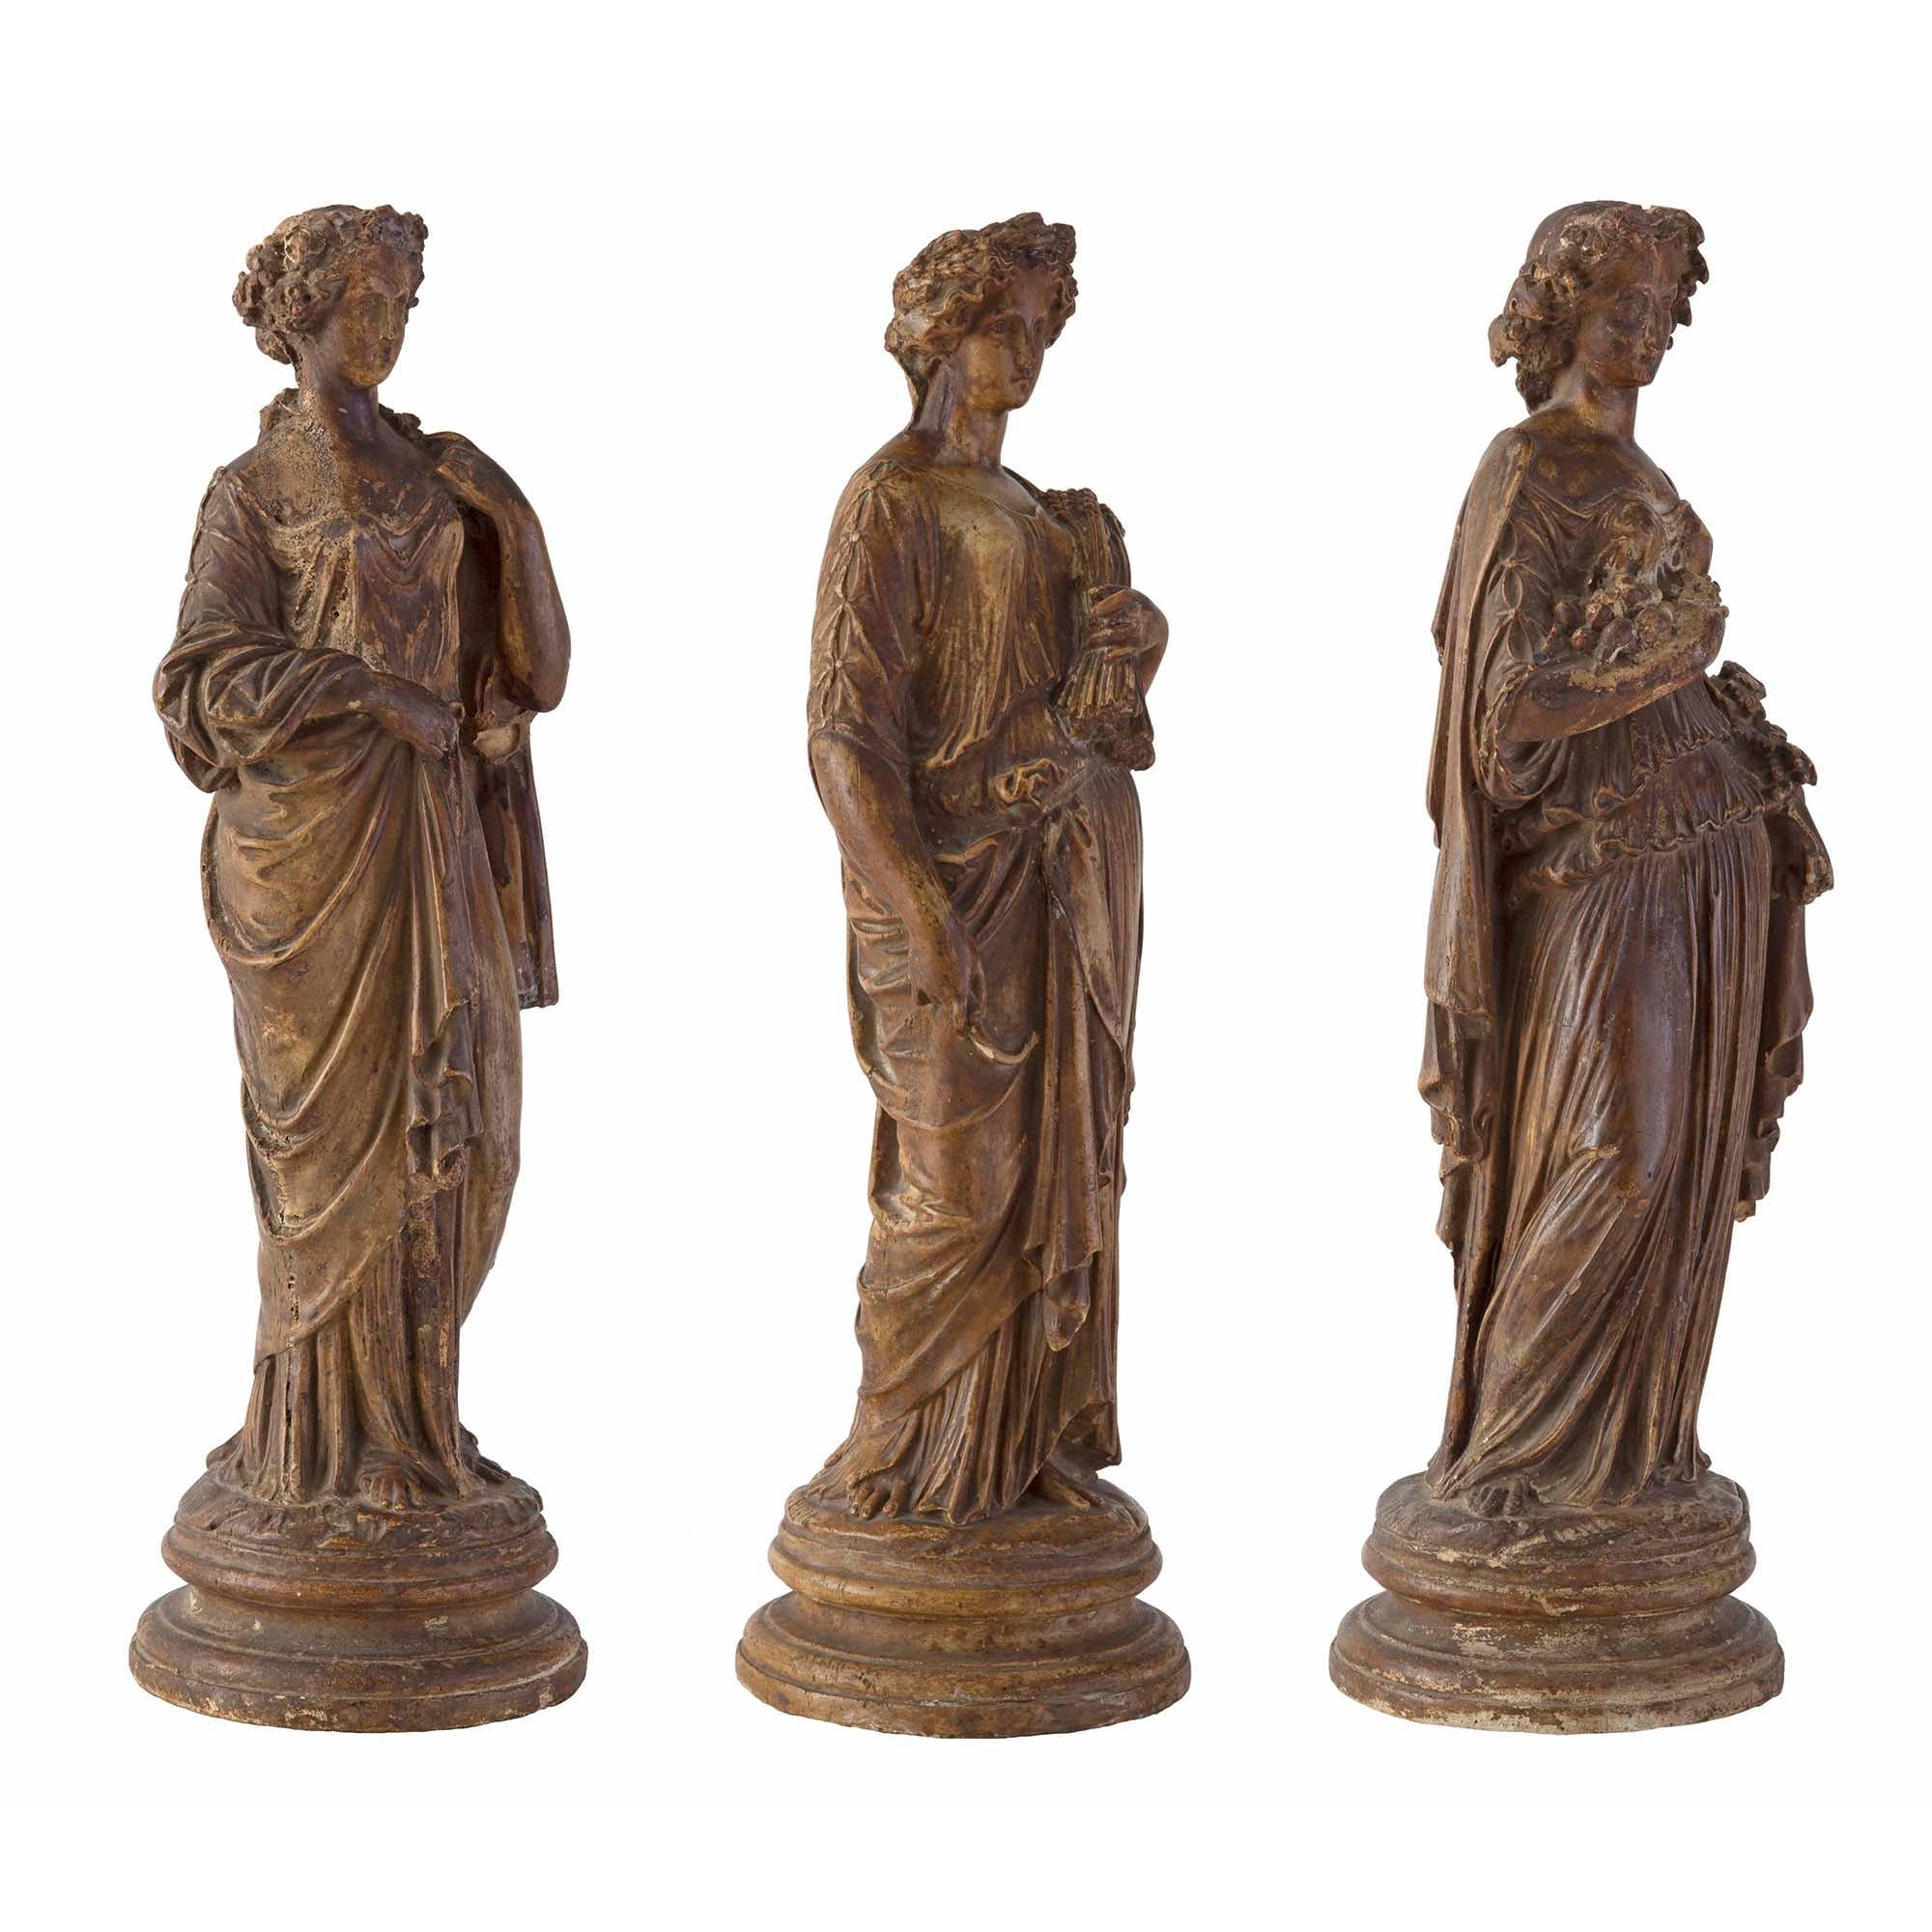 A beautiful and complete set of three Italian early 18th century neo-classical period terra cotta statues of maidens signed C PIERI. Each wonderfully executed statue is raised by a circular mottled base. Detailed maidens are draped in flowing